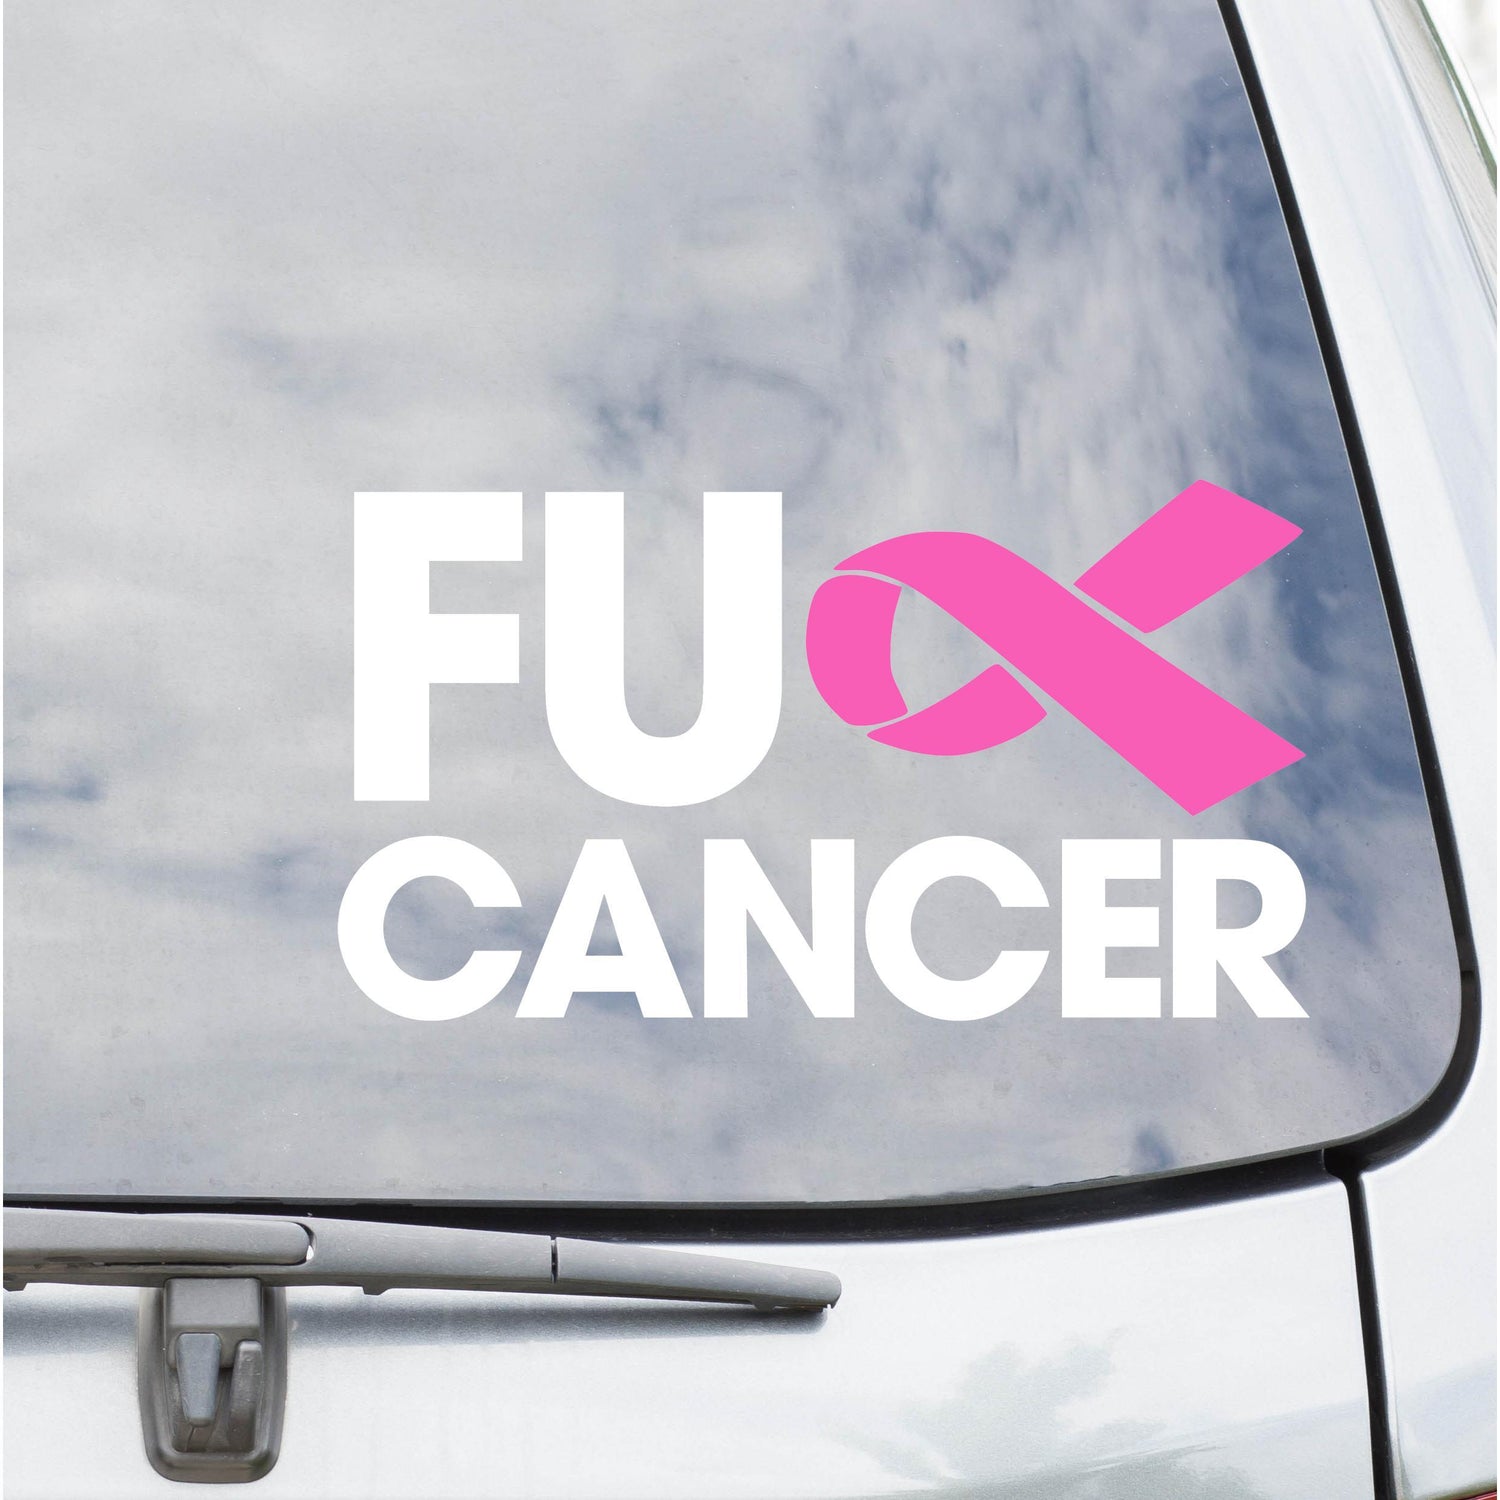 F*ck Cancer Decals - Assorted Styles-Infinity Beauty & Designs